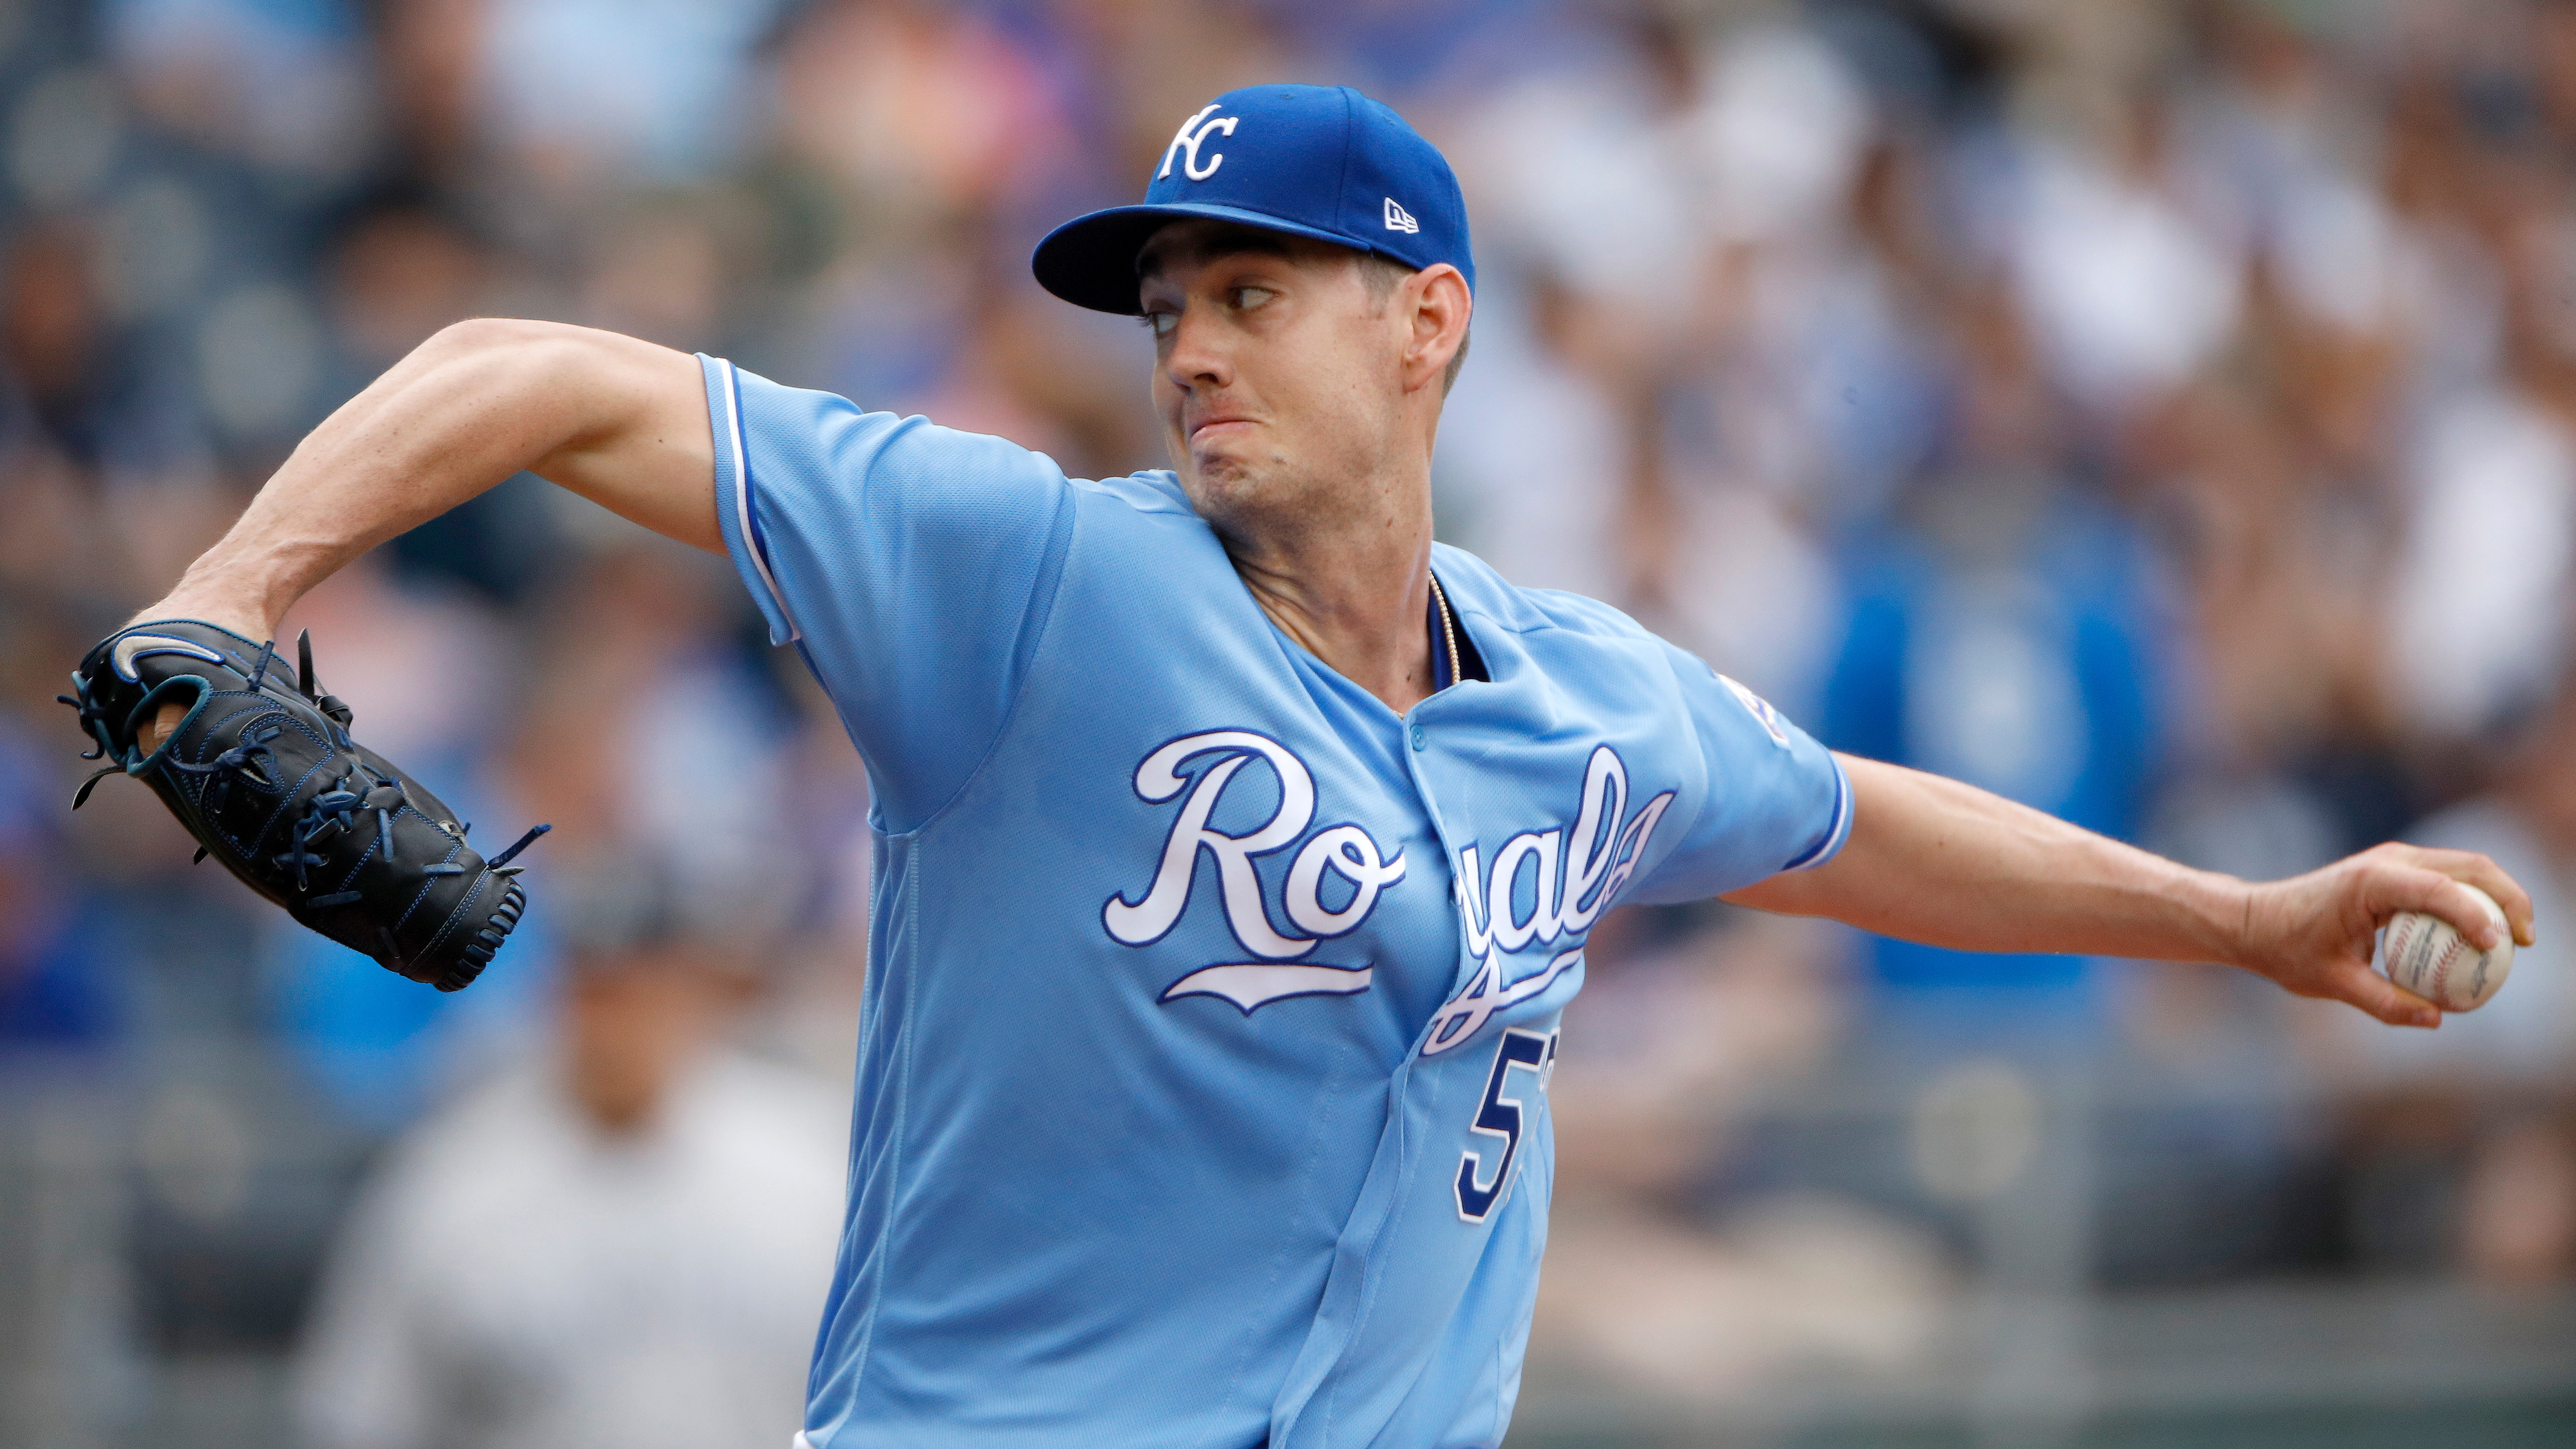 Royals end homestand with rubber-game loss to Yankees